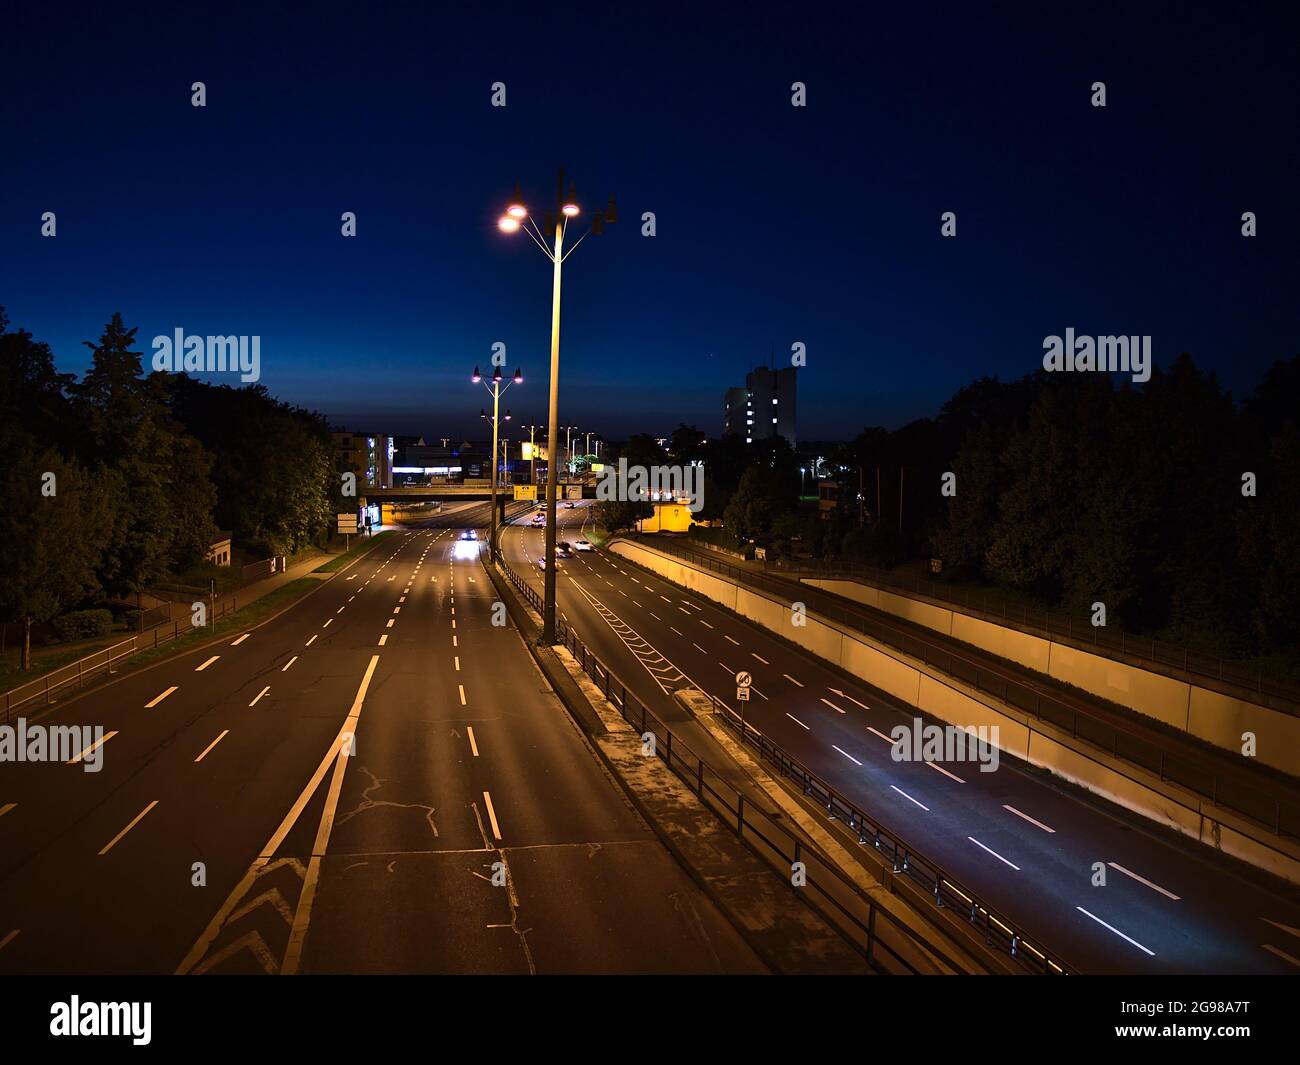 View of main road B9 leading through the center of Koblenz illuminated by lanterns with yellow light and cars passing by at night with trees. Stock Photo